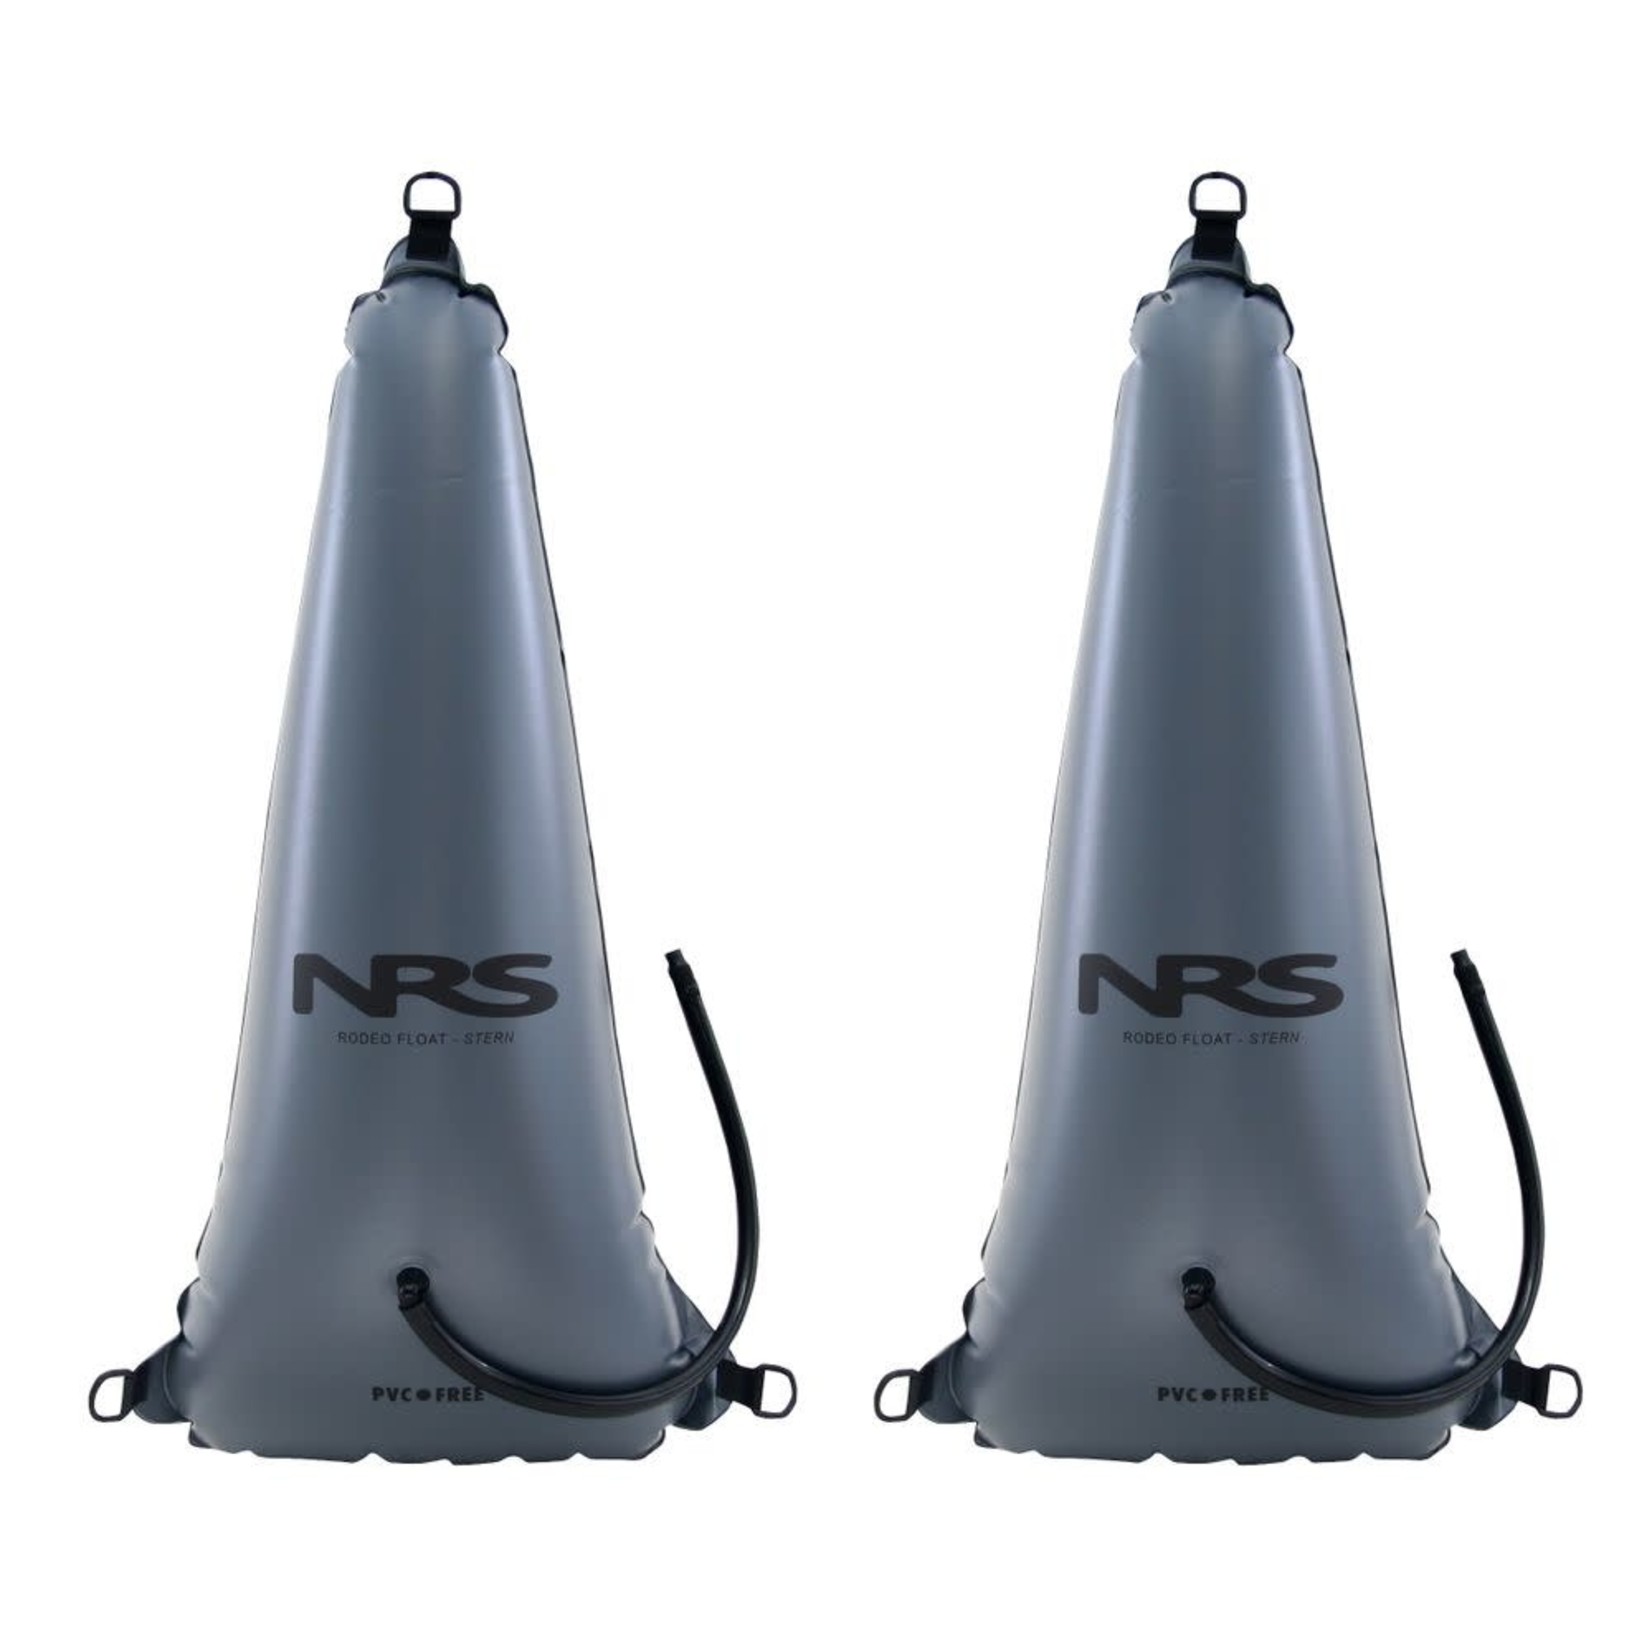 NRS NRS Rodeo Split Stern Float Bags